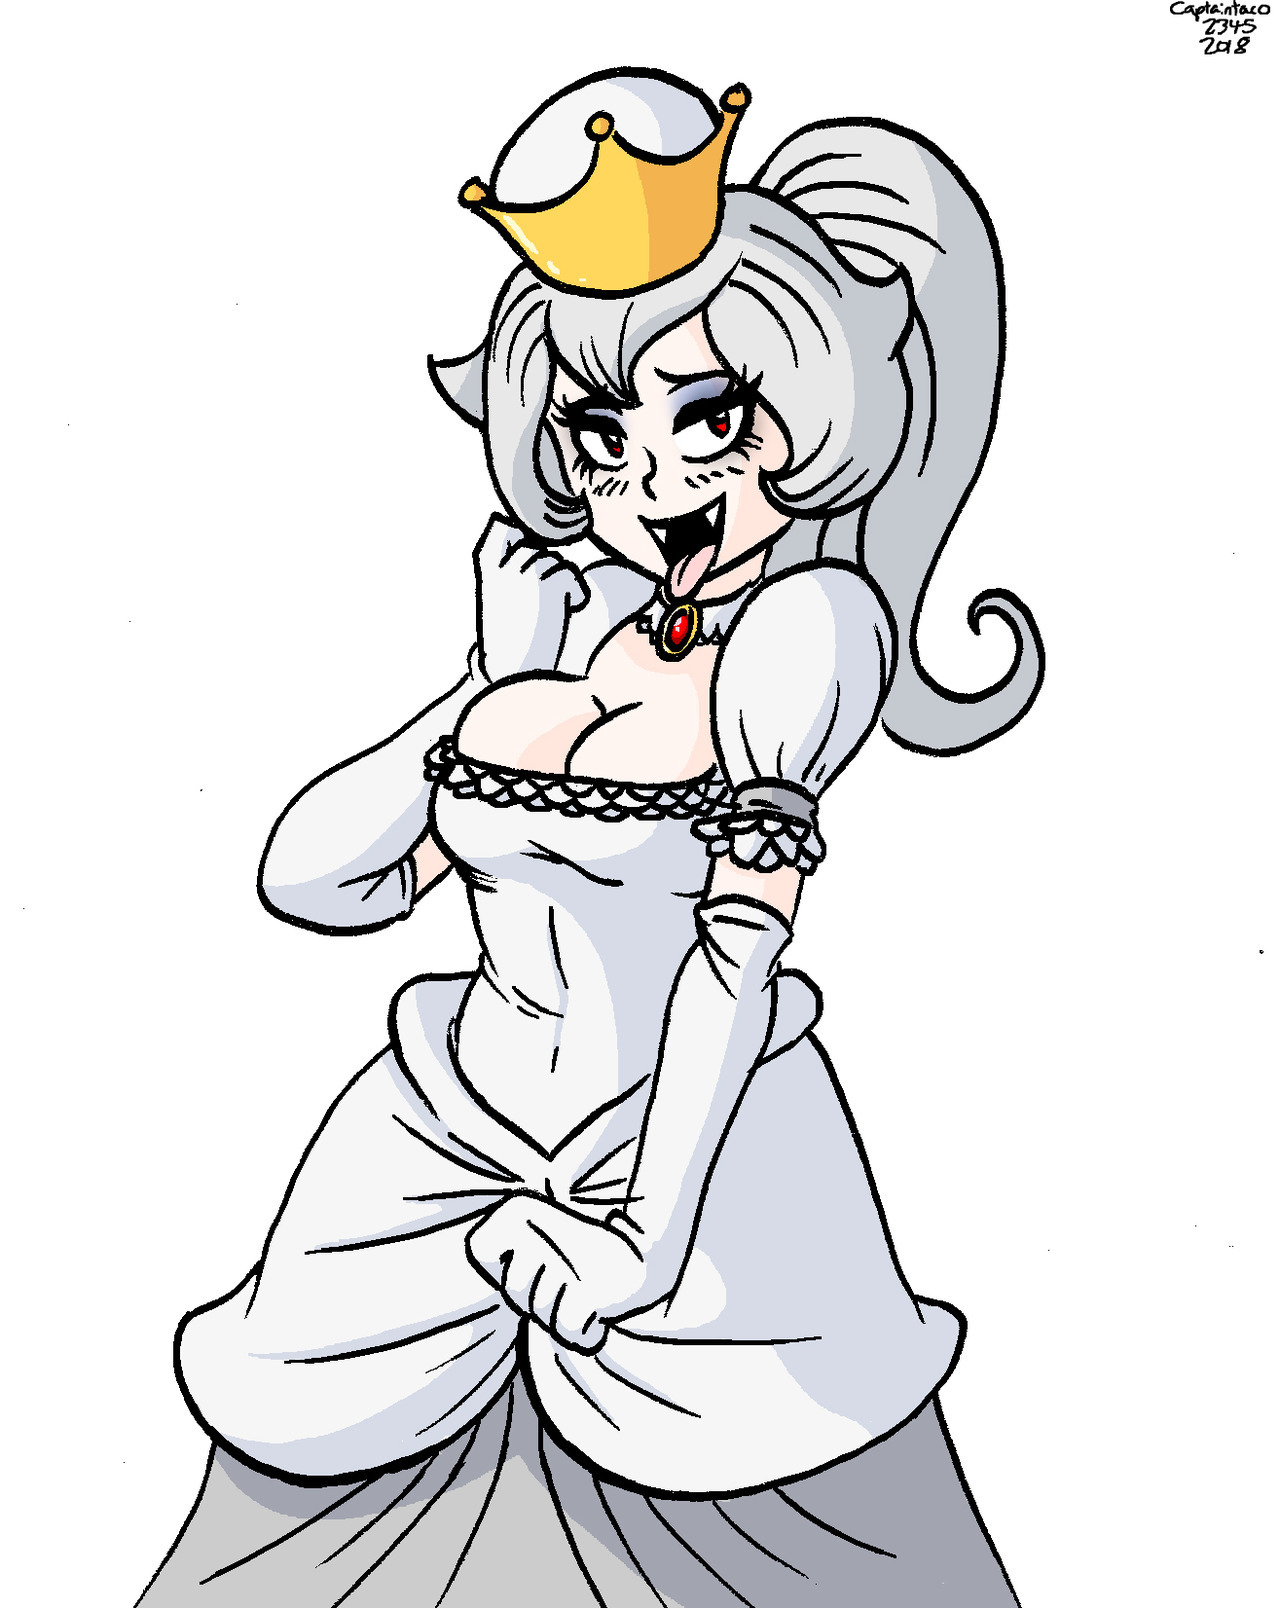 I’ve seen a couple different versions of Booette/Peachaboo, but I decided to kinda